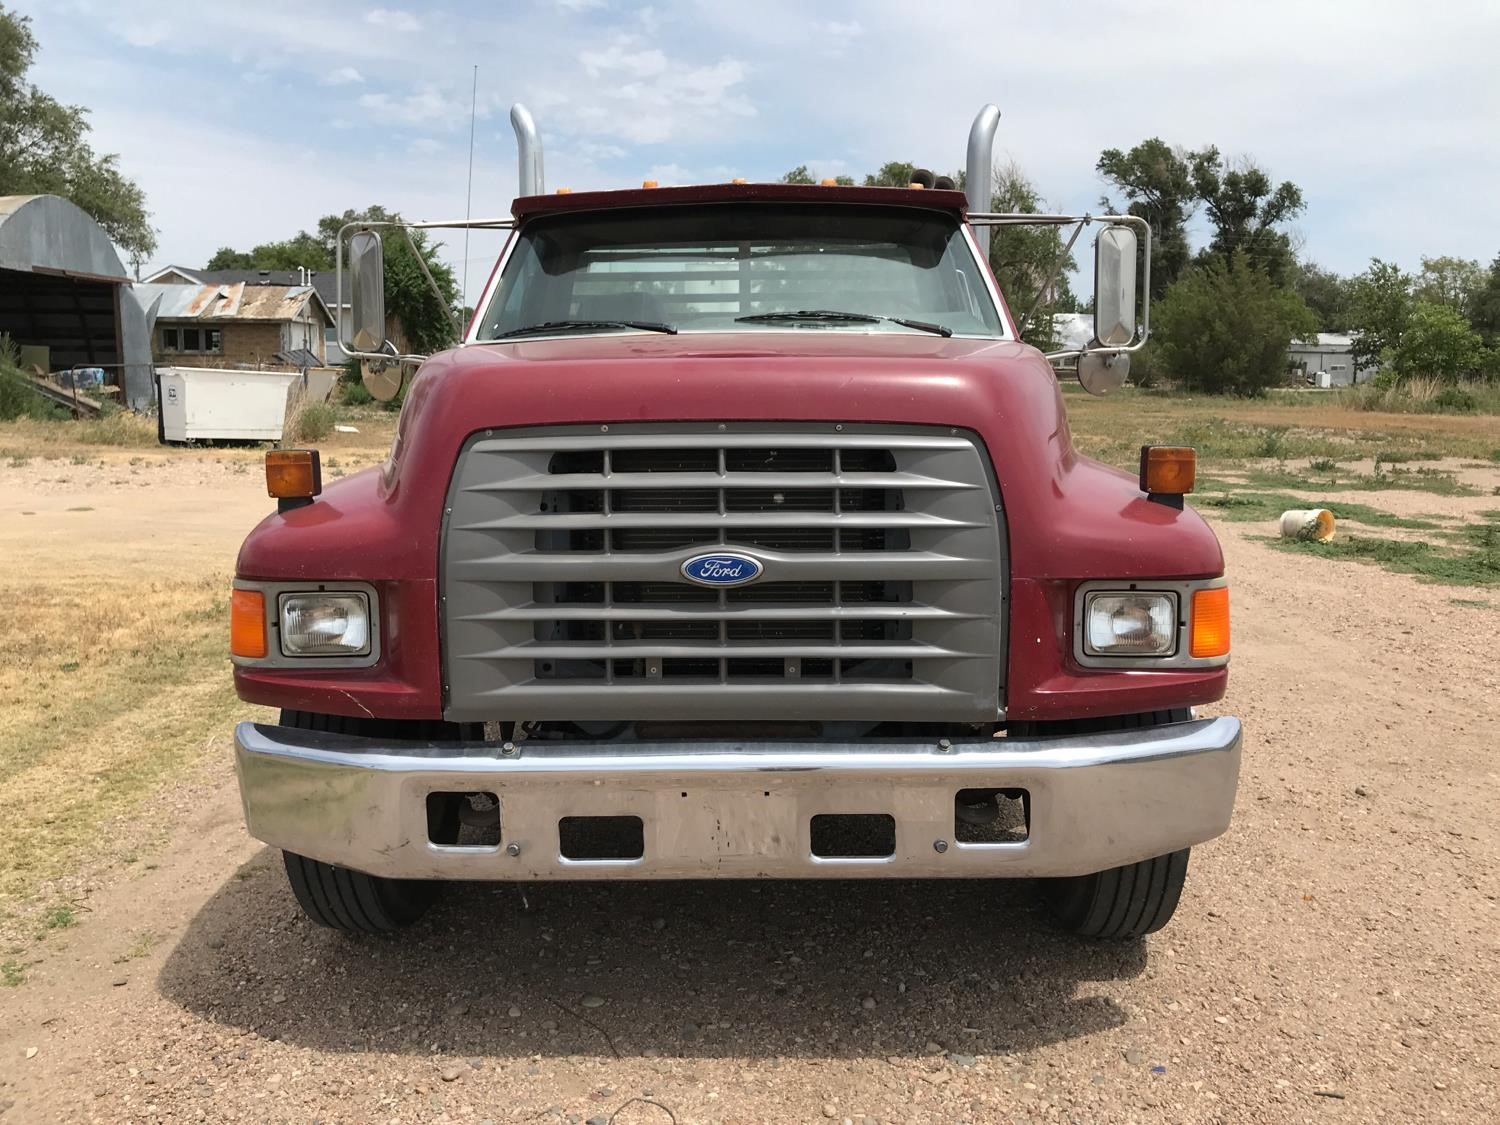 front view truck with stacks